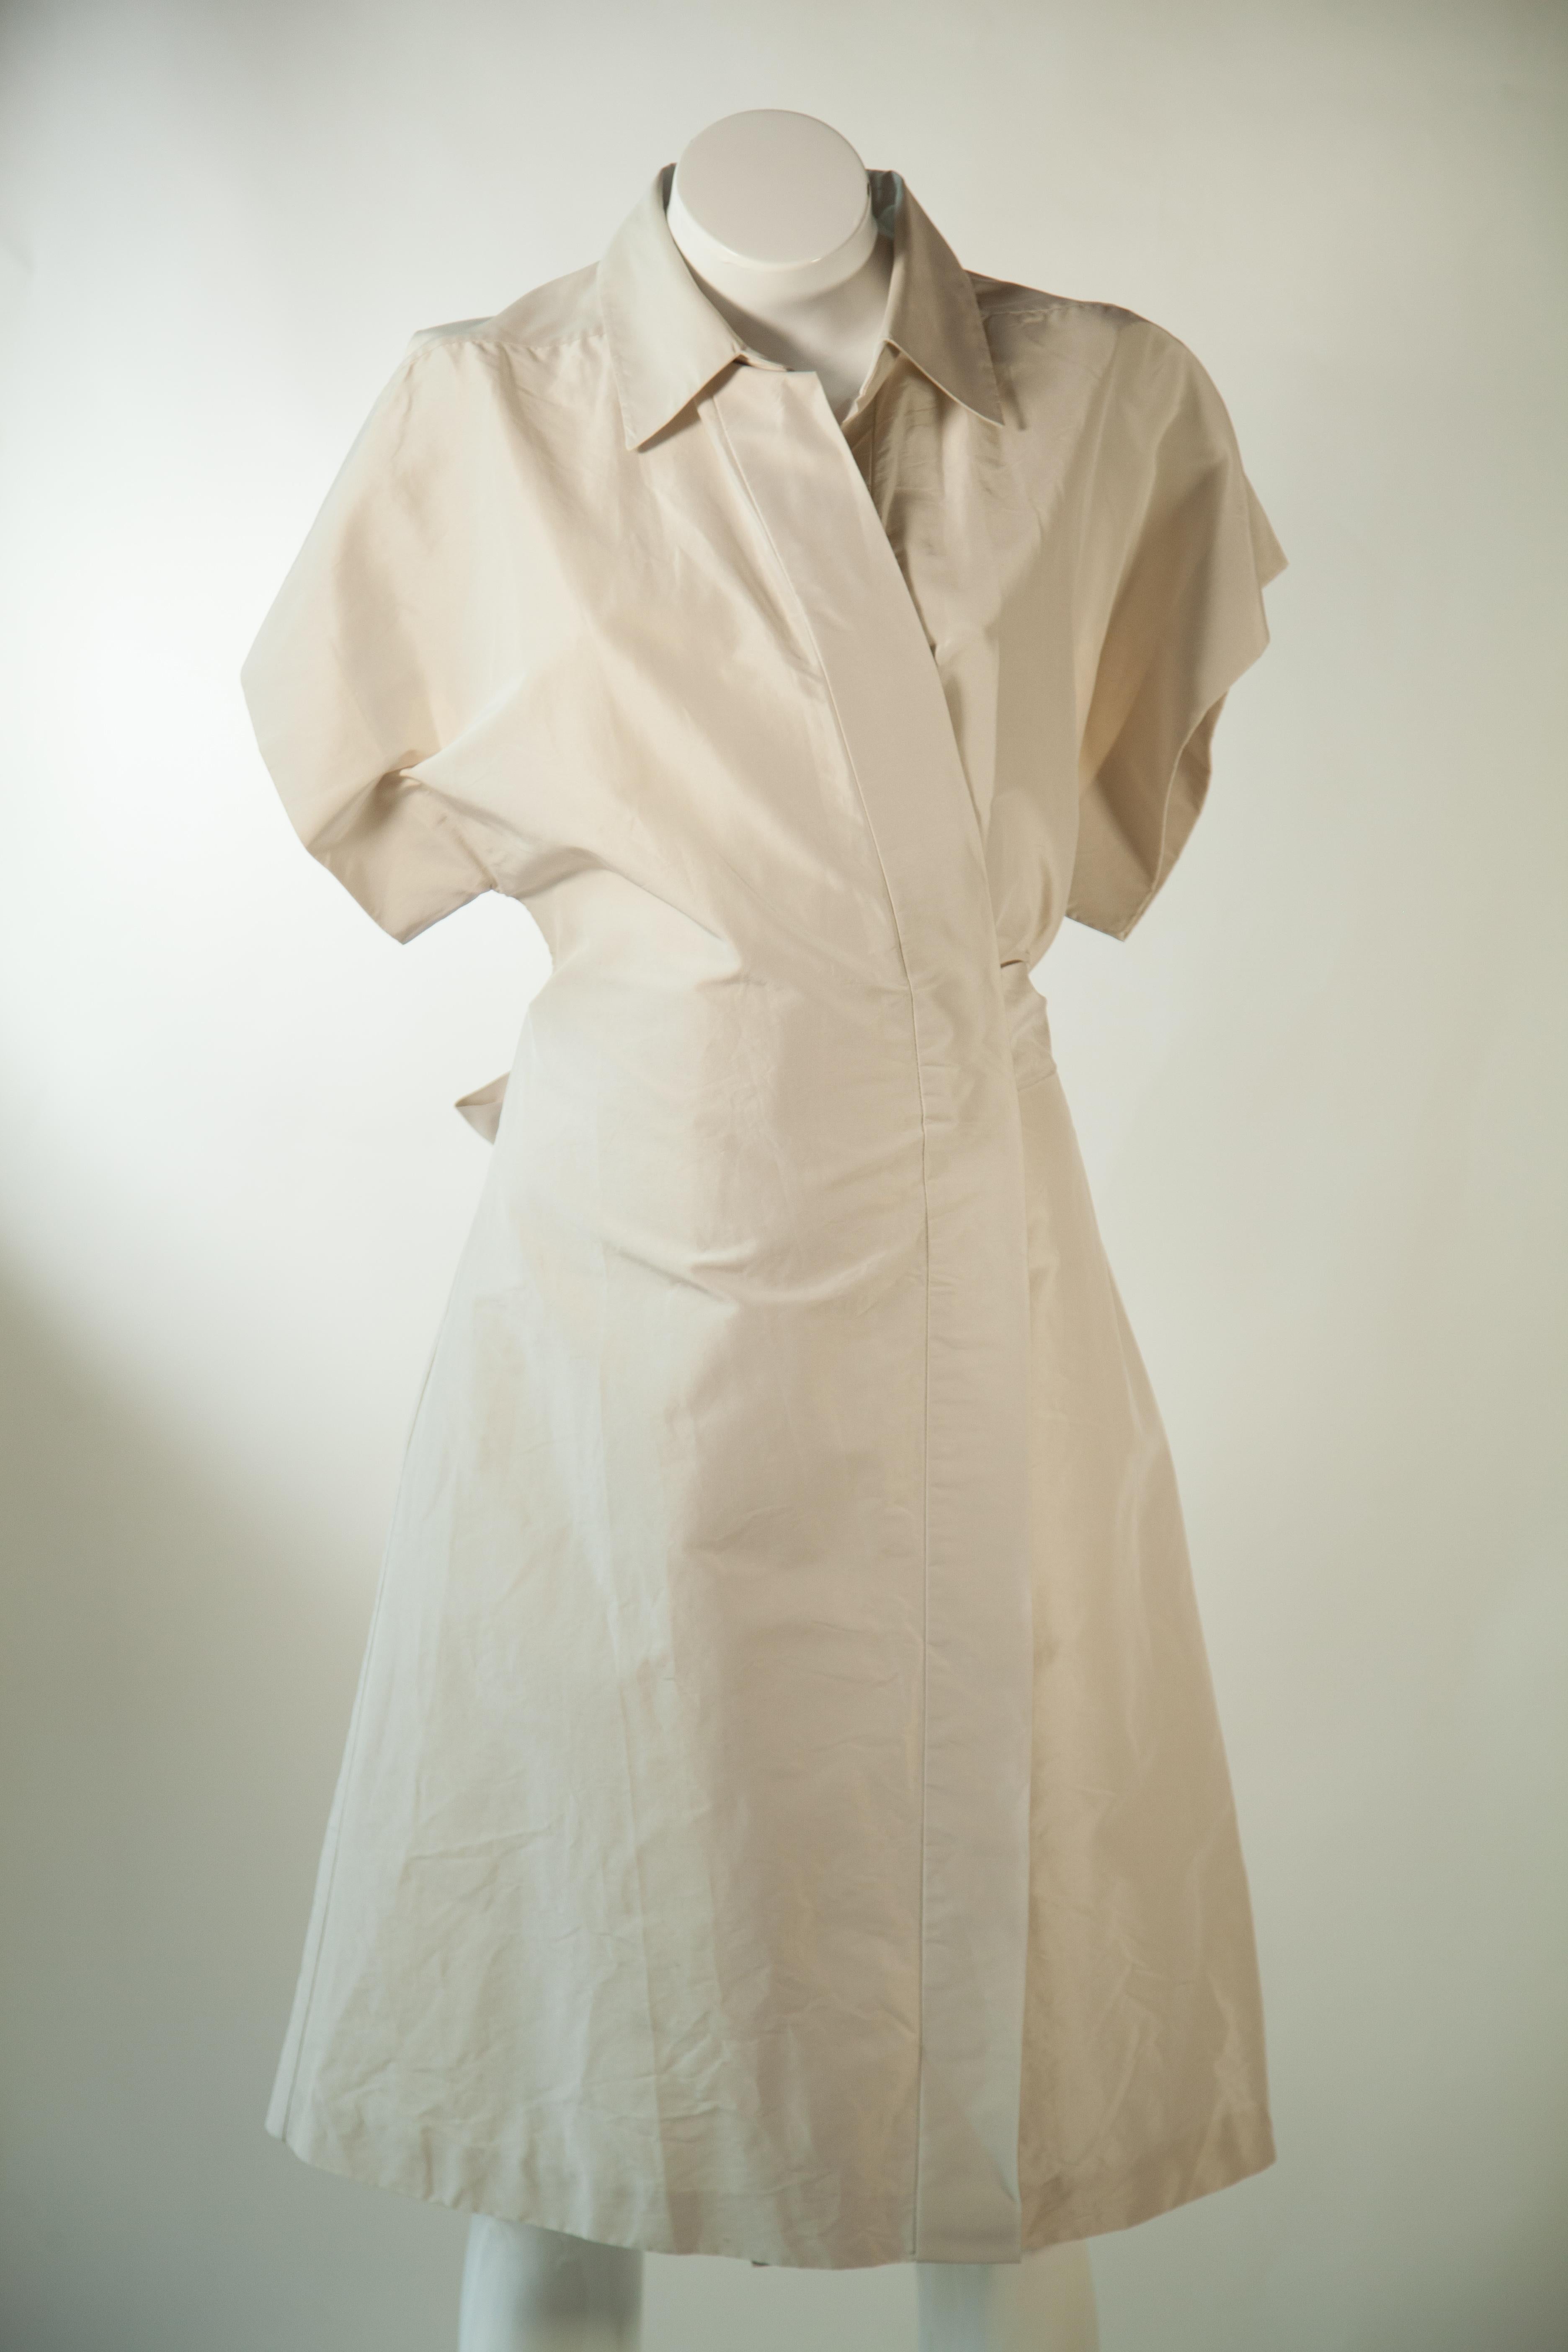 The Yves Saint Laurent Rive Gauche White dress is a white wrap dress featuring short sleeves. Made with signature quality fabrics, this stylish and timeless piece will ensure you look chic and feel comfortable. An ideal choice for any occasion.